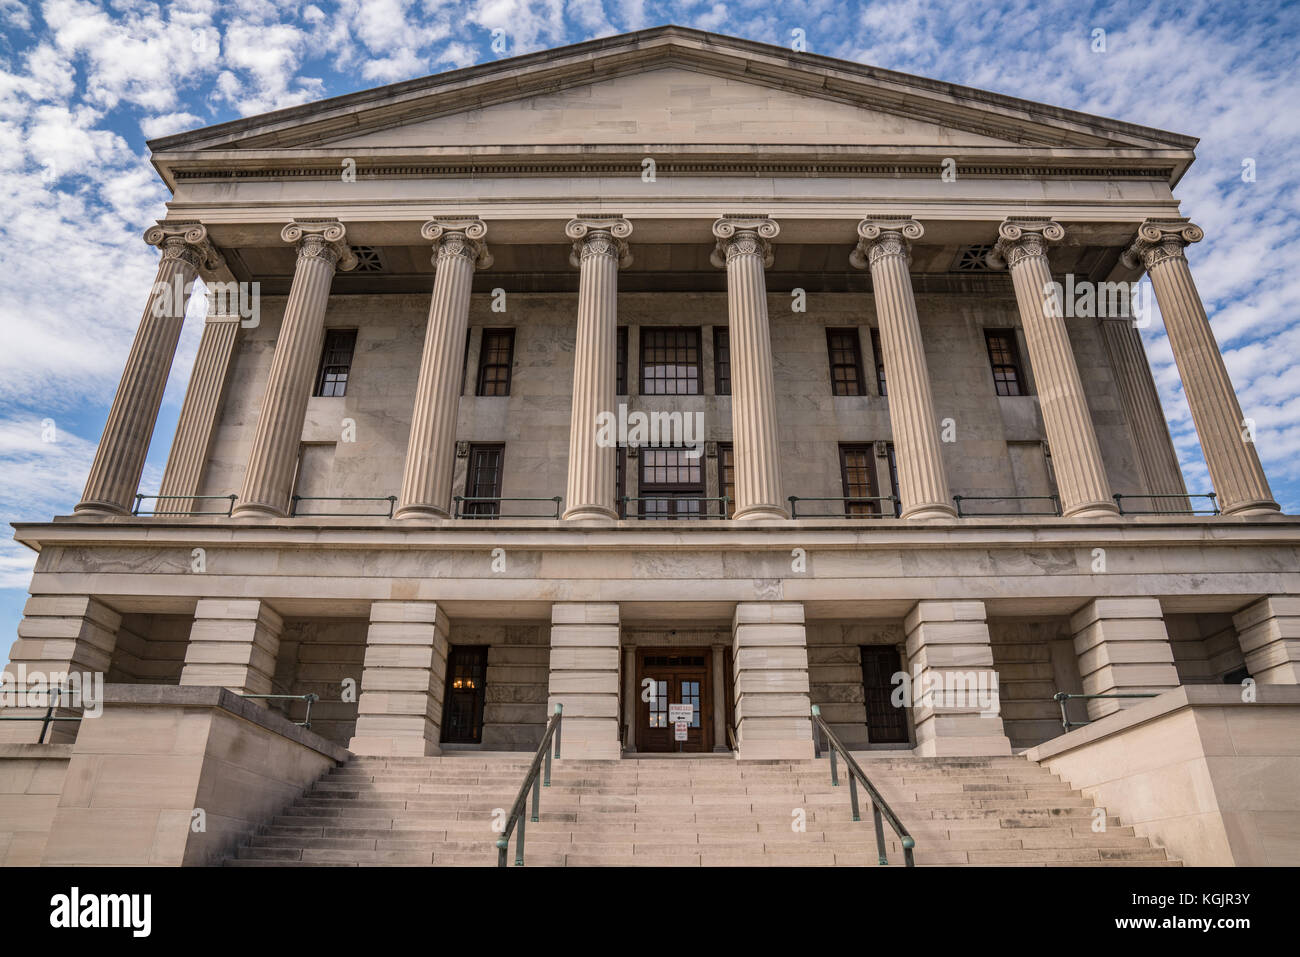 Fassade der Tennessee State Capital Building in Nashville, Tennessee Stockfoto